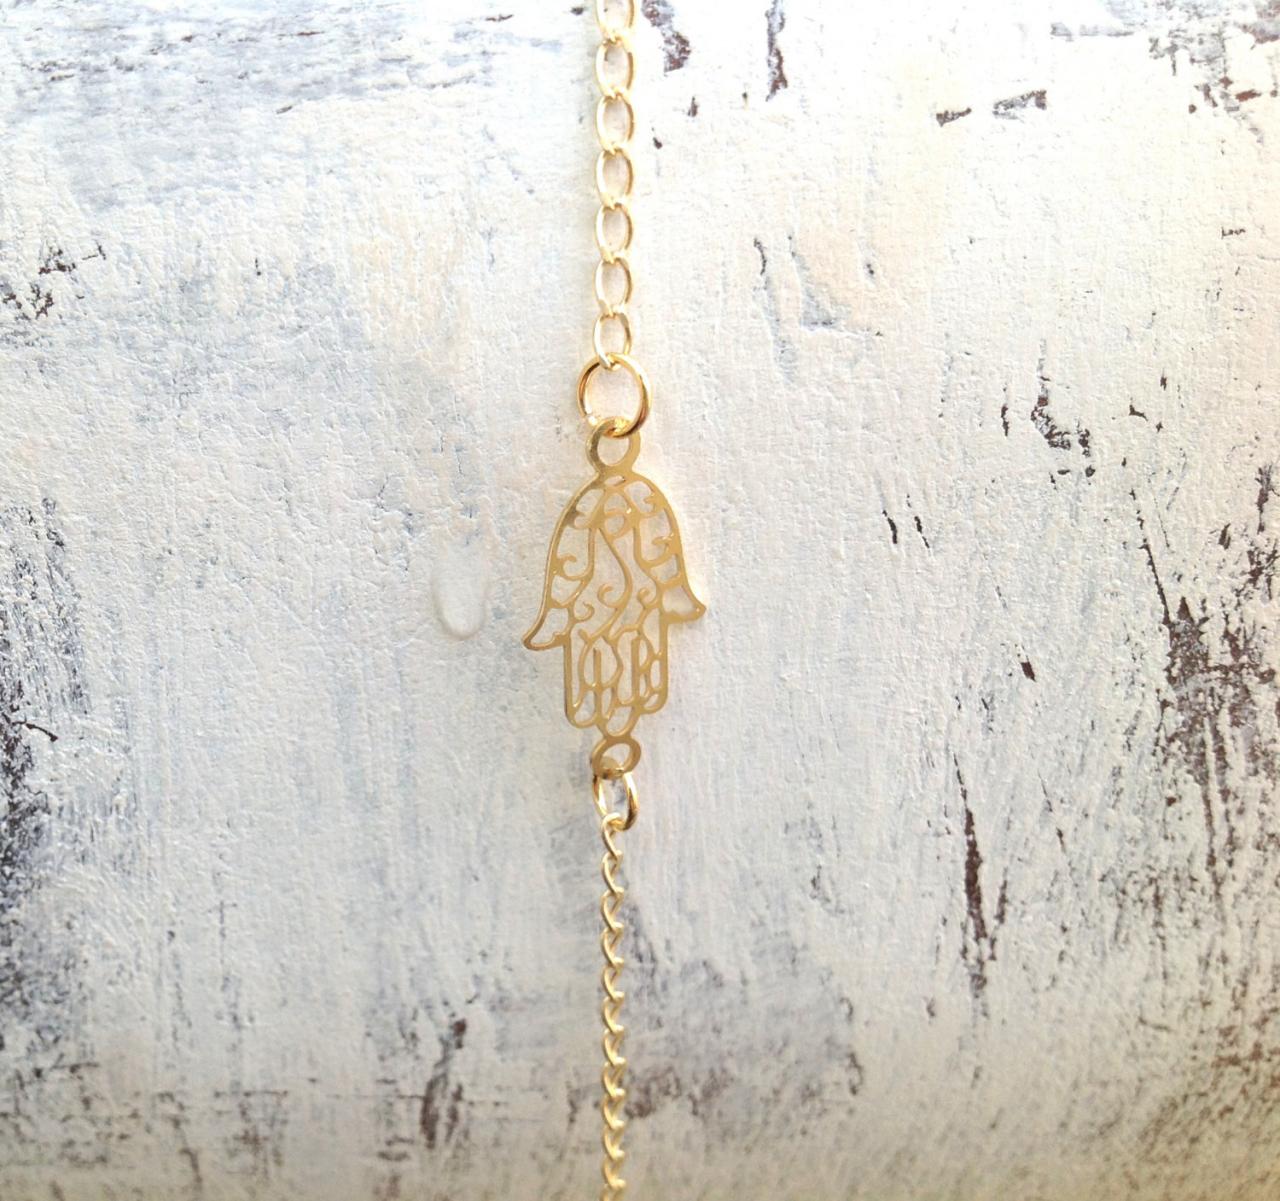 Hamsa Anklet, Anklet, Gold Anklet, Gold Hamsa, Hamsa Jewelry, Delicate Anklet, Hamsa, Luck Jewelry, Small Bracelet, Anklet 113-1